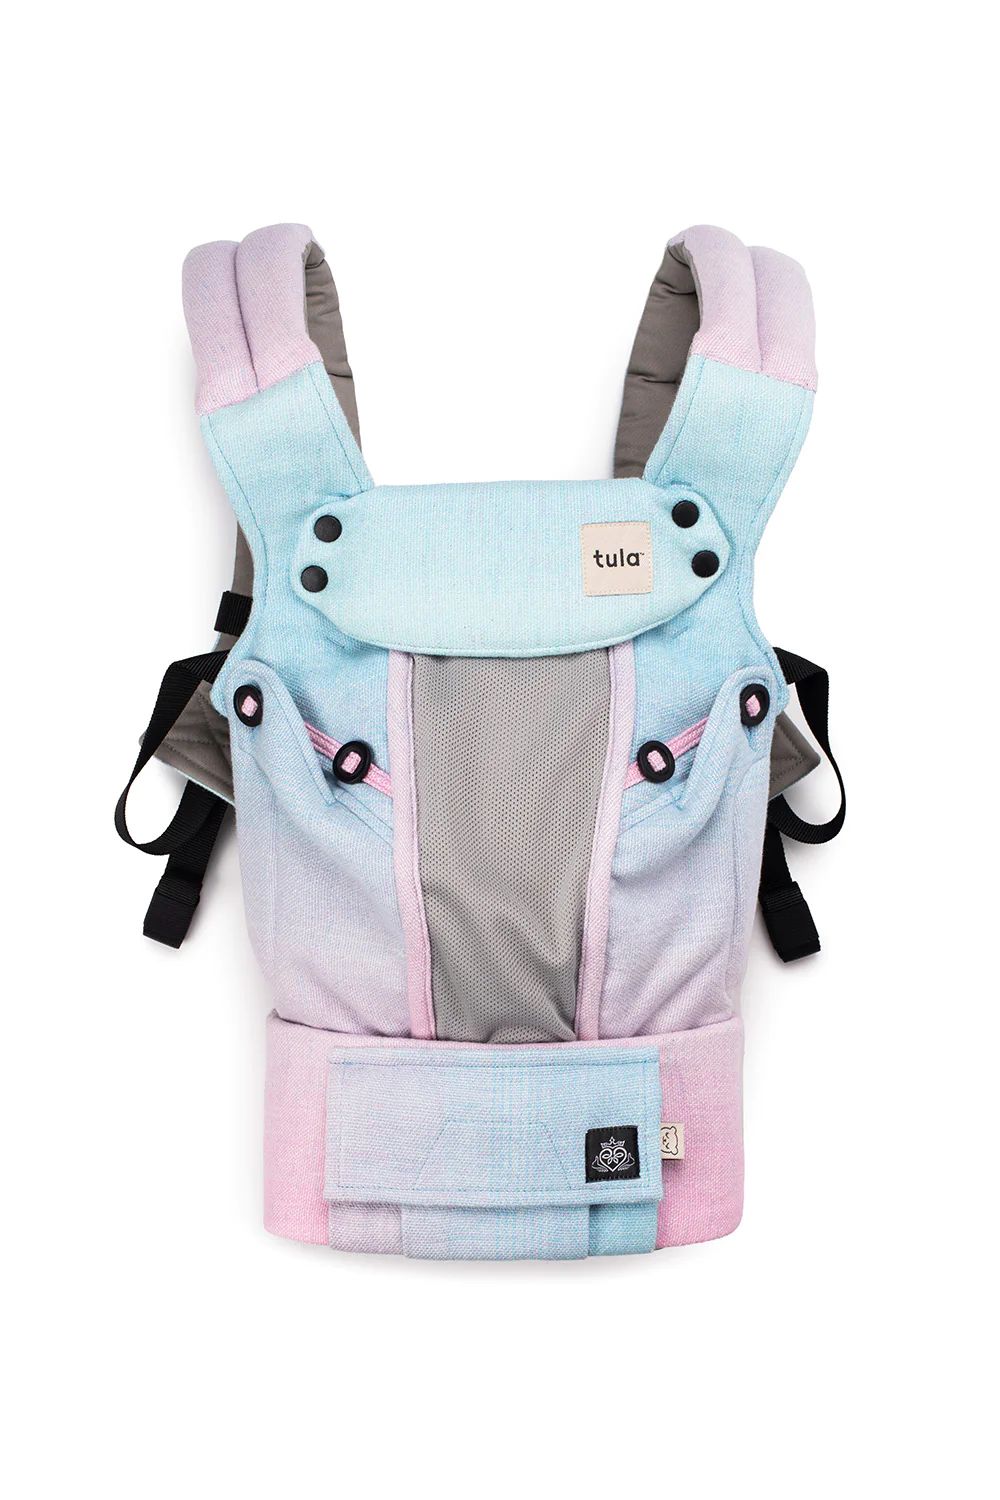 Hard Candy - Signature Handwoven Explore Baby Carrier | Baby Tula